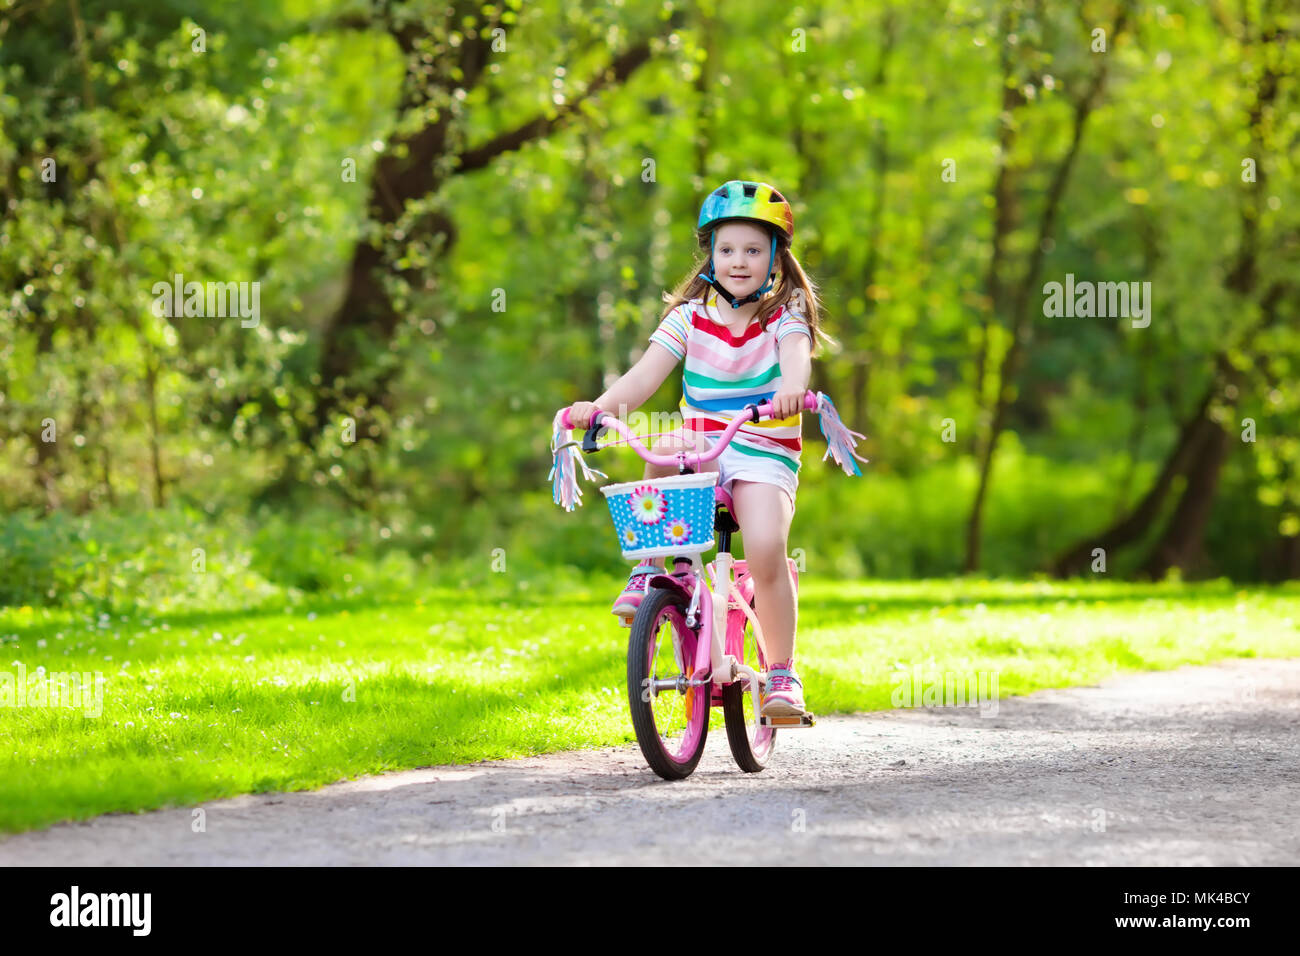 teaching a child to ride a bike without stabilisers